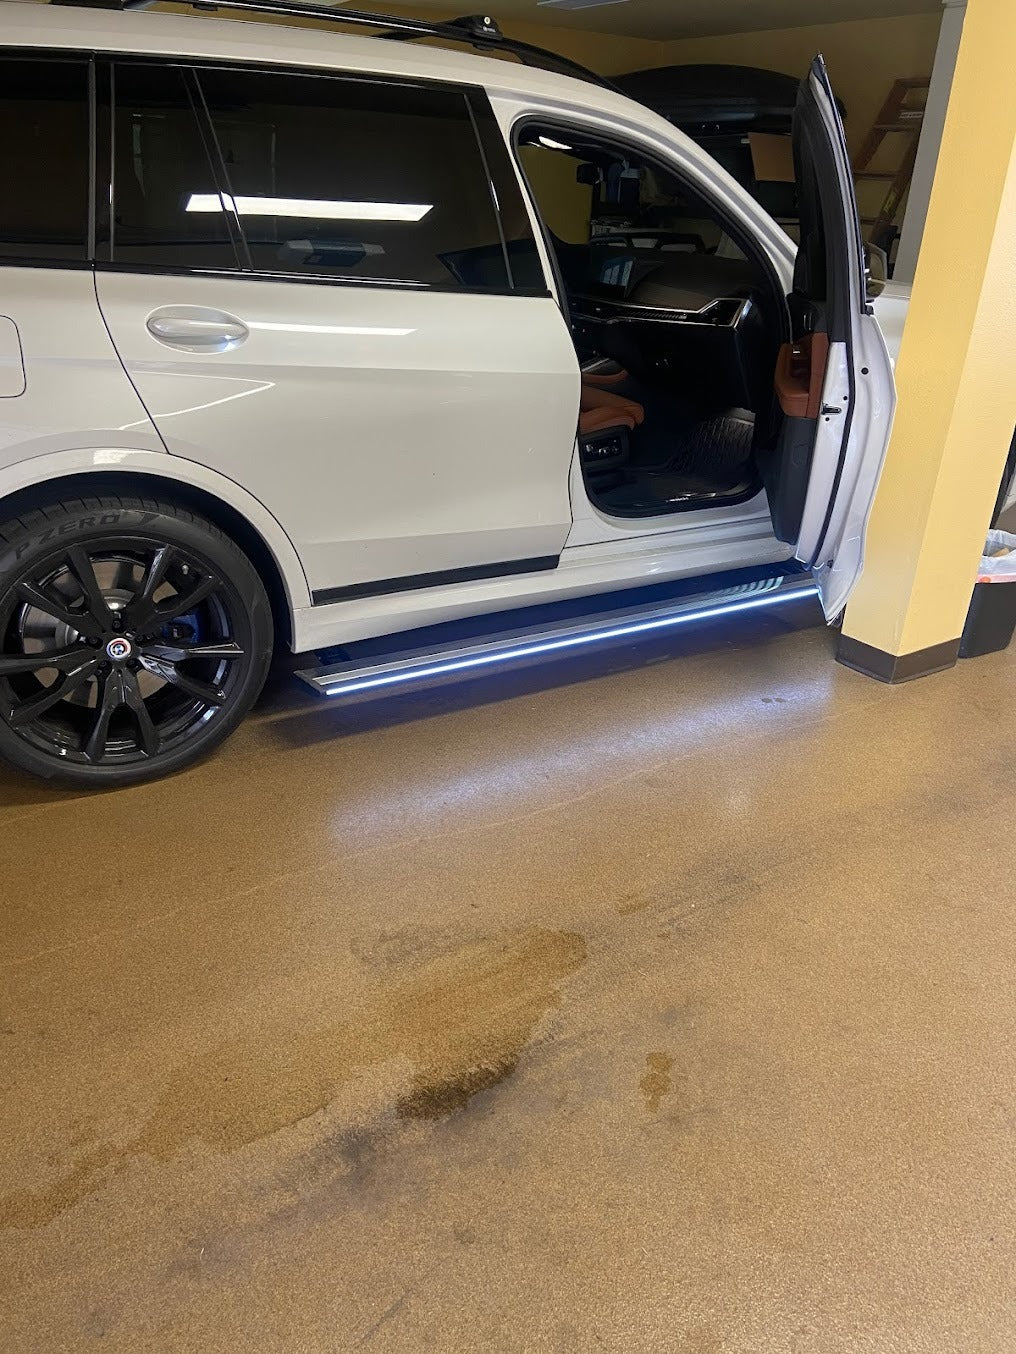 AutoTech Trends Running boards and steps for Range Rover Sport 2018-2021 - The best-selling, Sleek and Retractable steps on the market for Luxury SUV’s & XUVs that are durable, reliable, electric, retractable, and lit with LEDs. Introducing the E-LUME Series 1 – the first bolt-on retractable Automatic Running Boards designed specifically for Range Rover Sport 2018-2021. Experience the convenience and style with AutoTech Trends today!